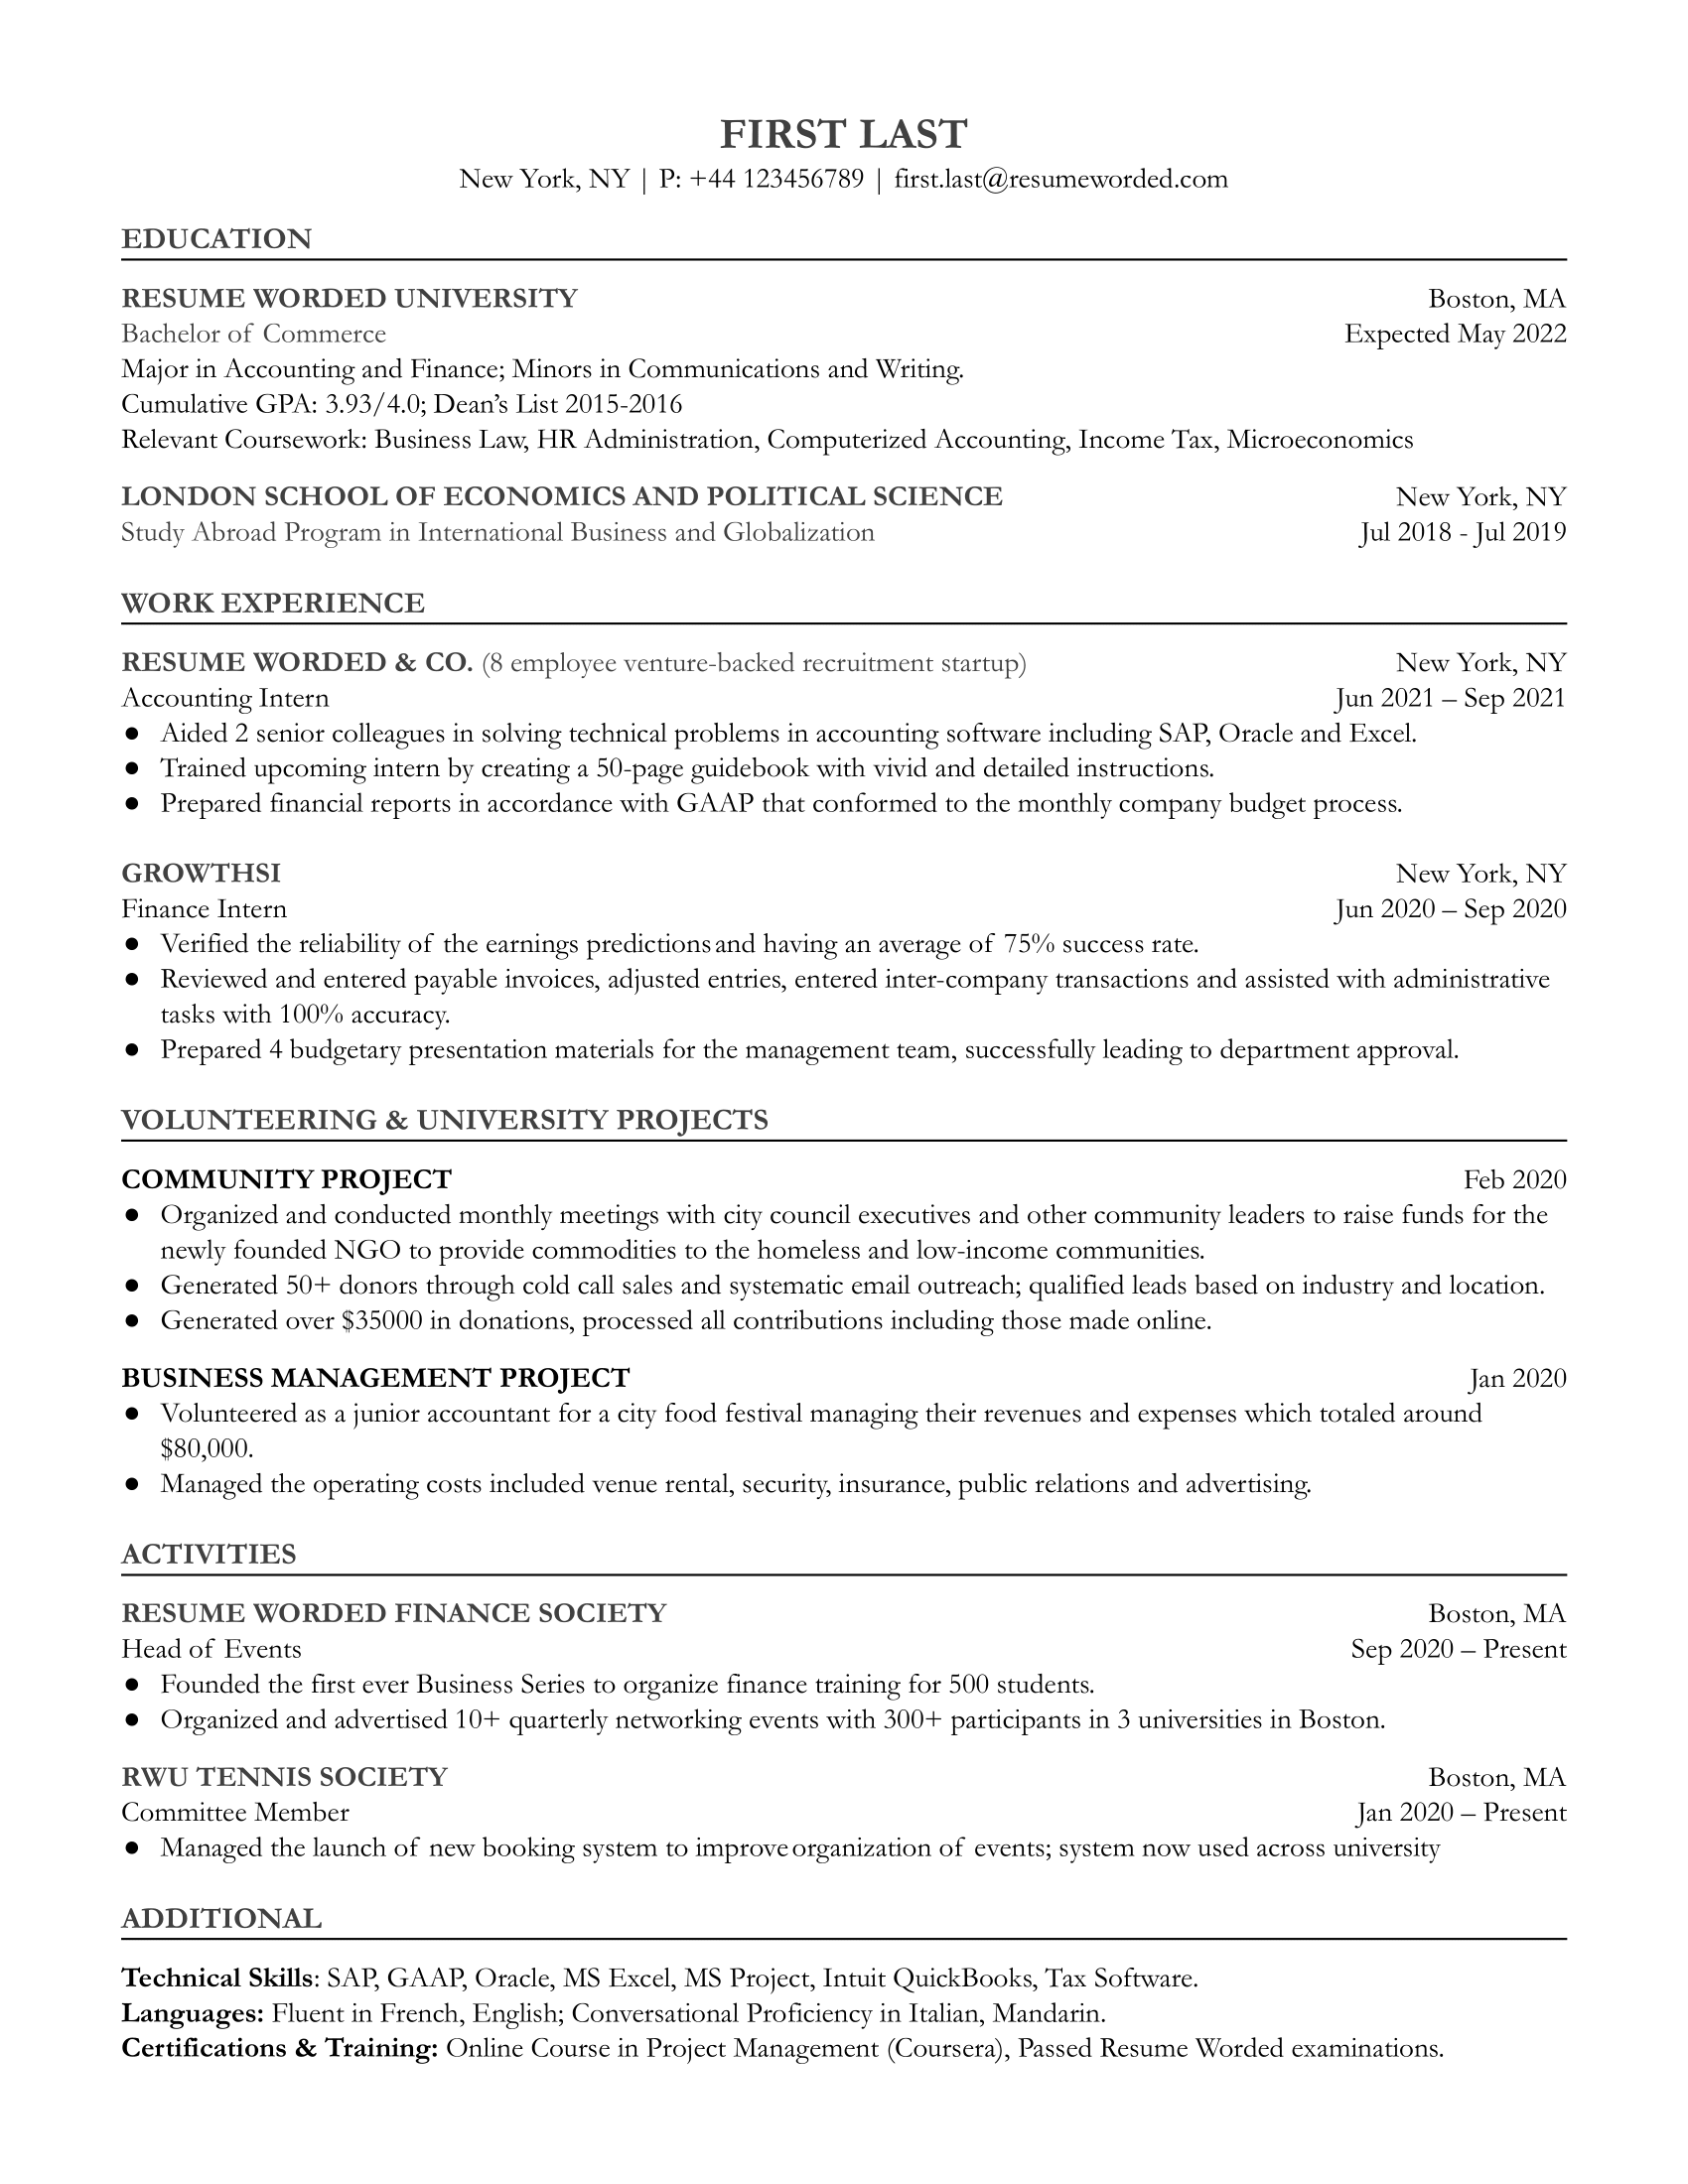 Entry level accountant resume with educational history, relevant internships, and volunteer projects